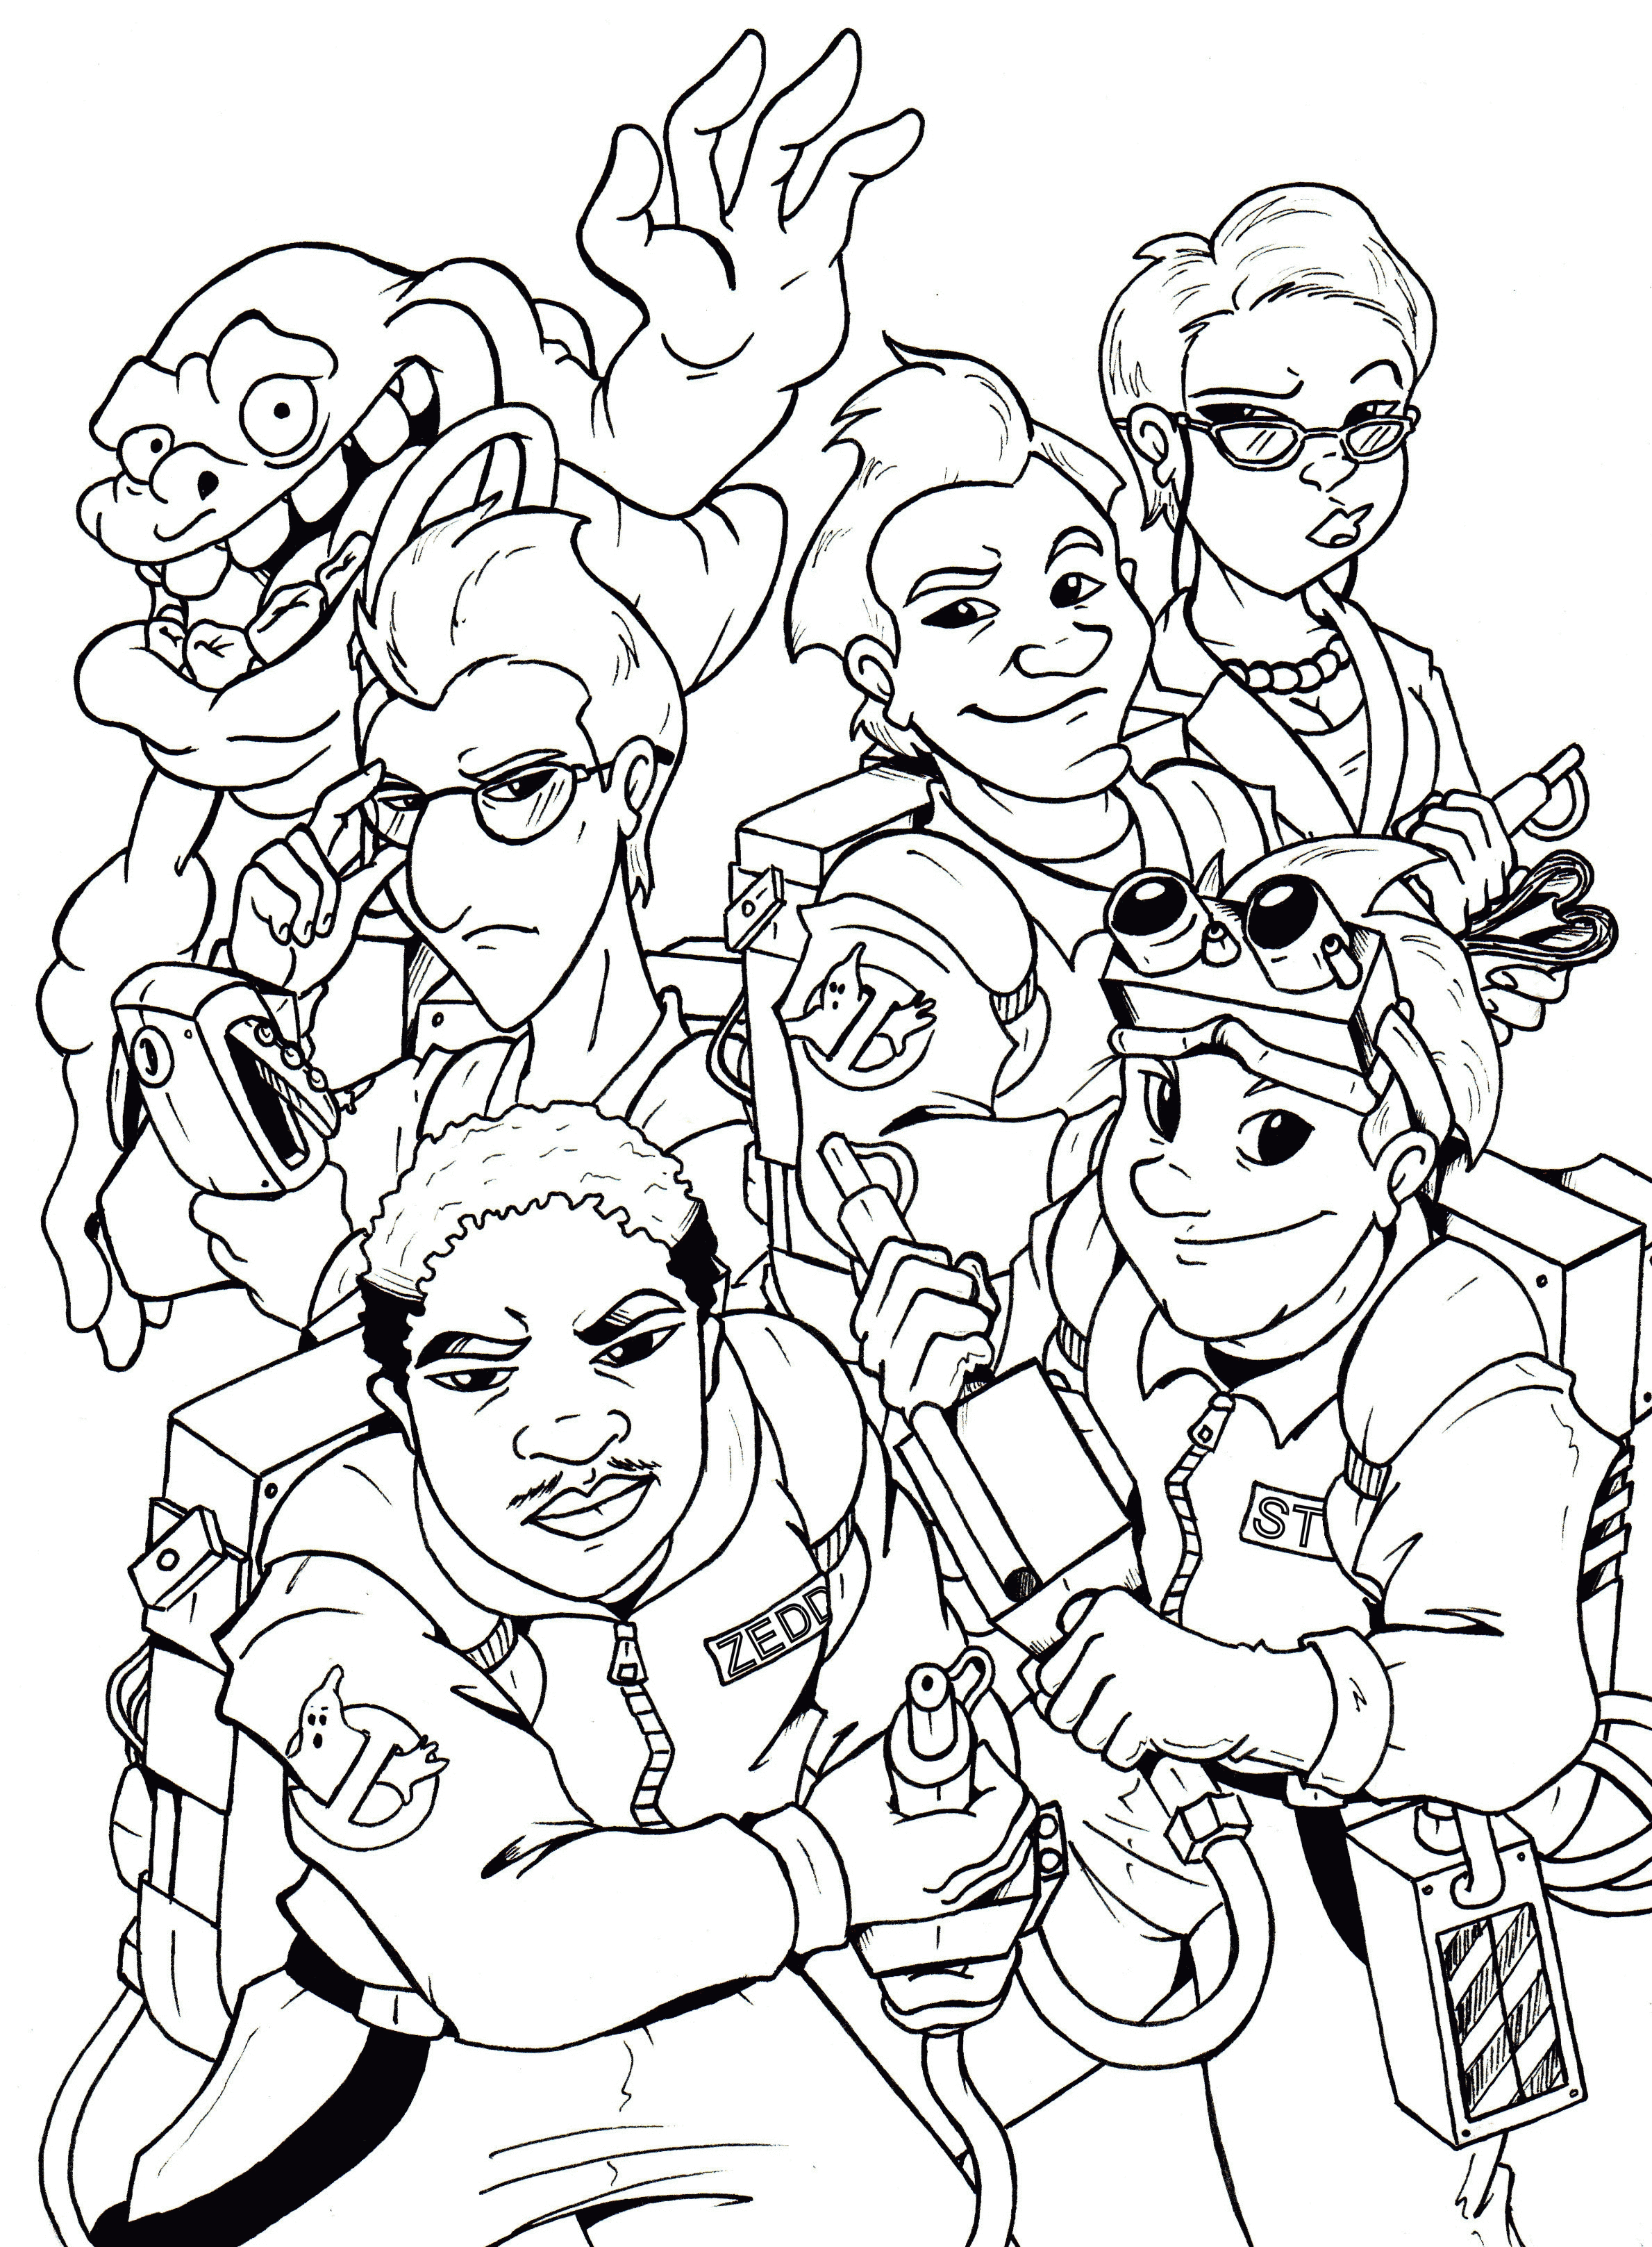 Download Ghostbusters Coloring Pages Ghostbusters 3 Coloring Pages Kids Coloring Home